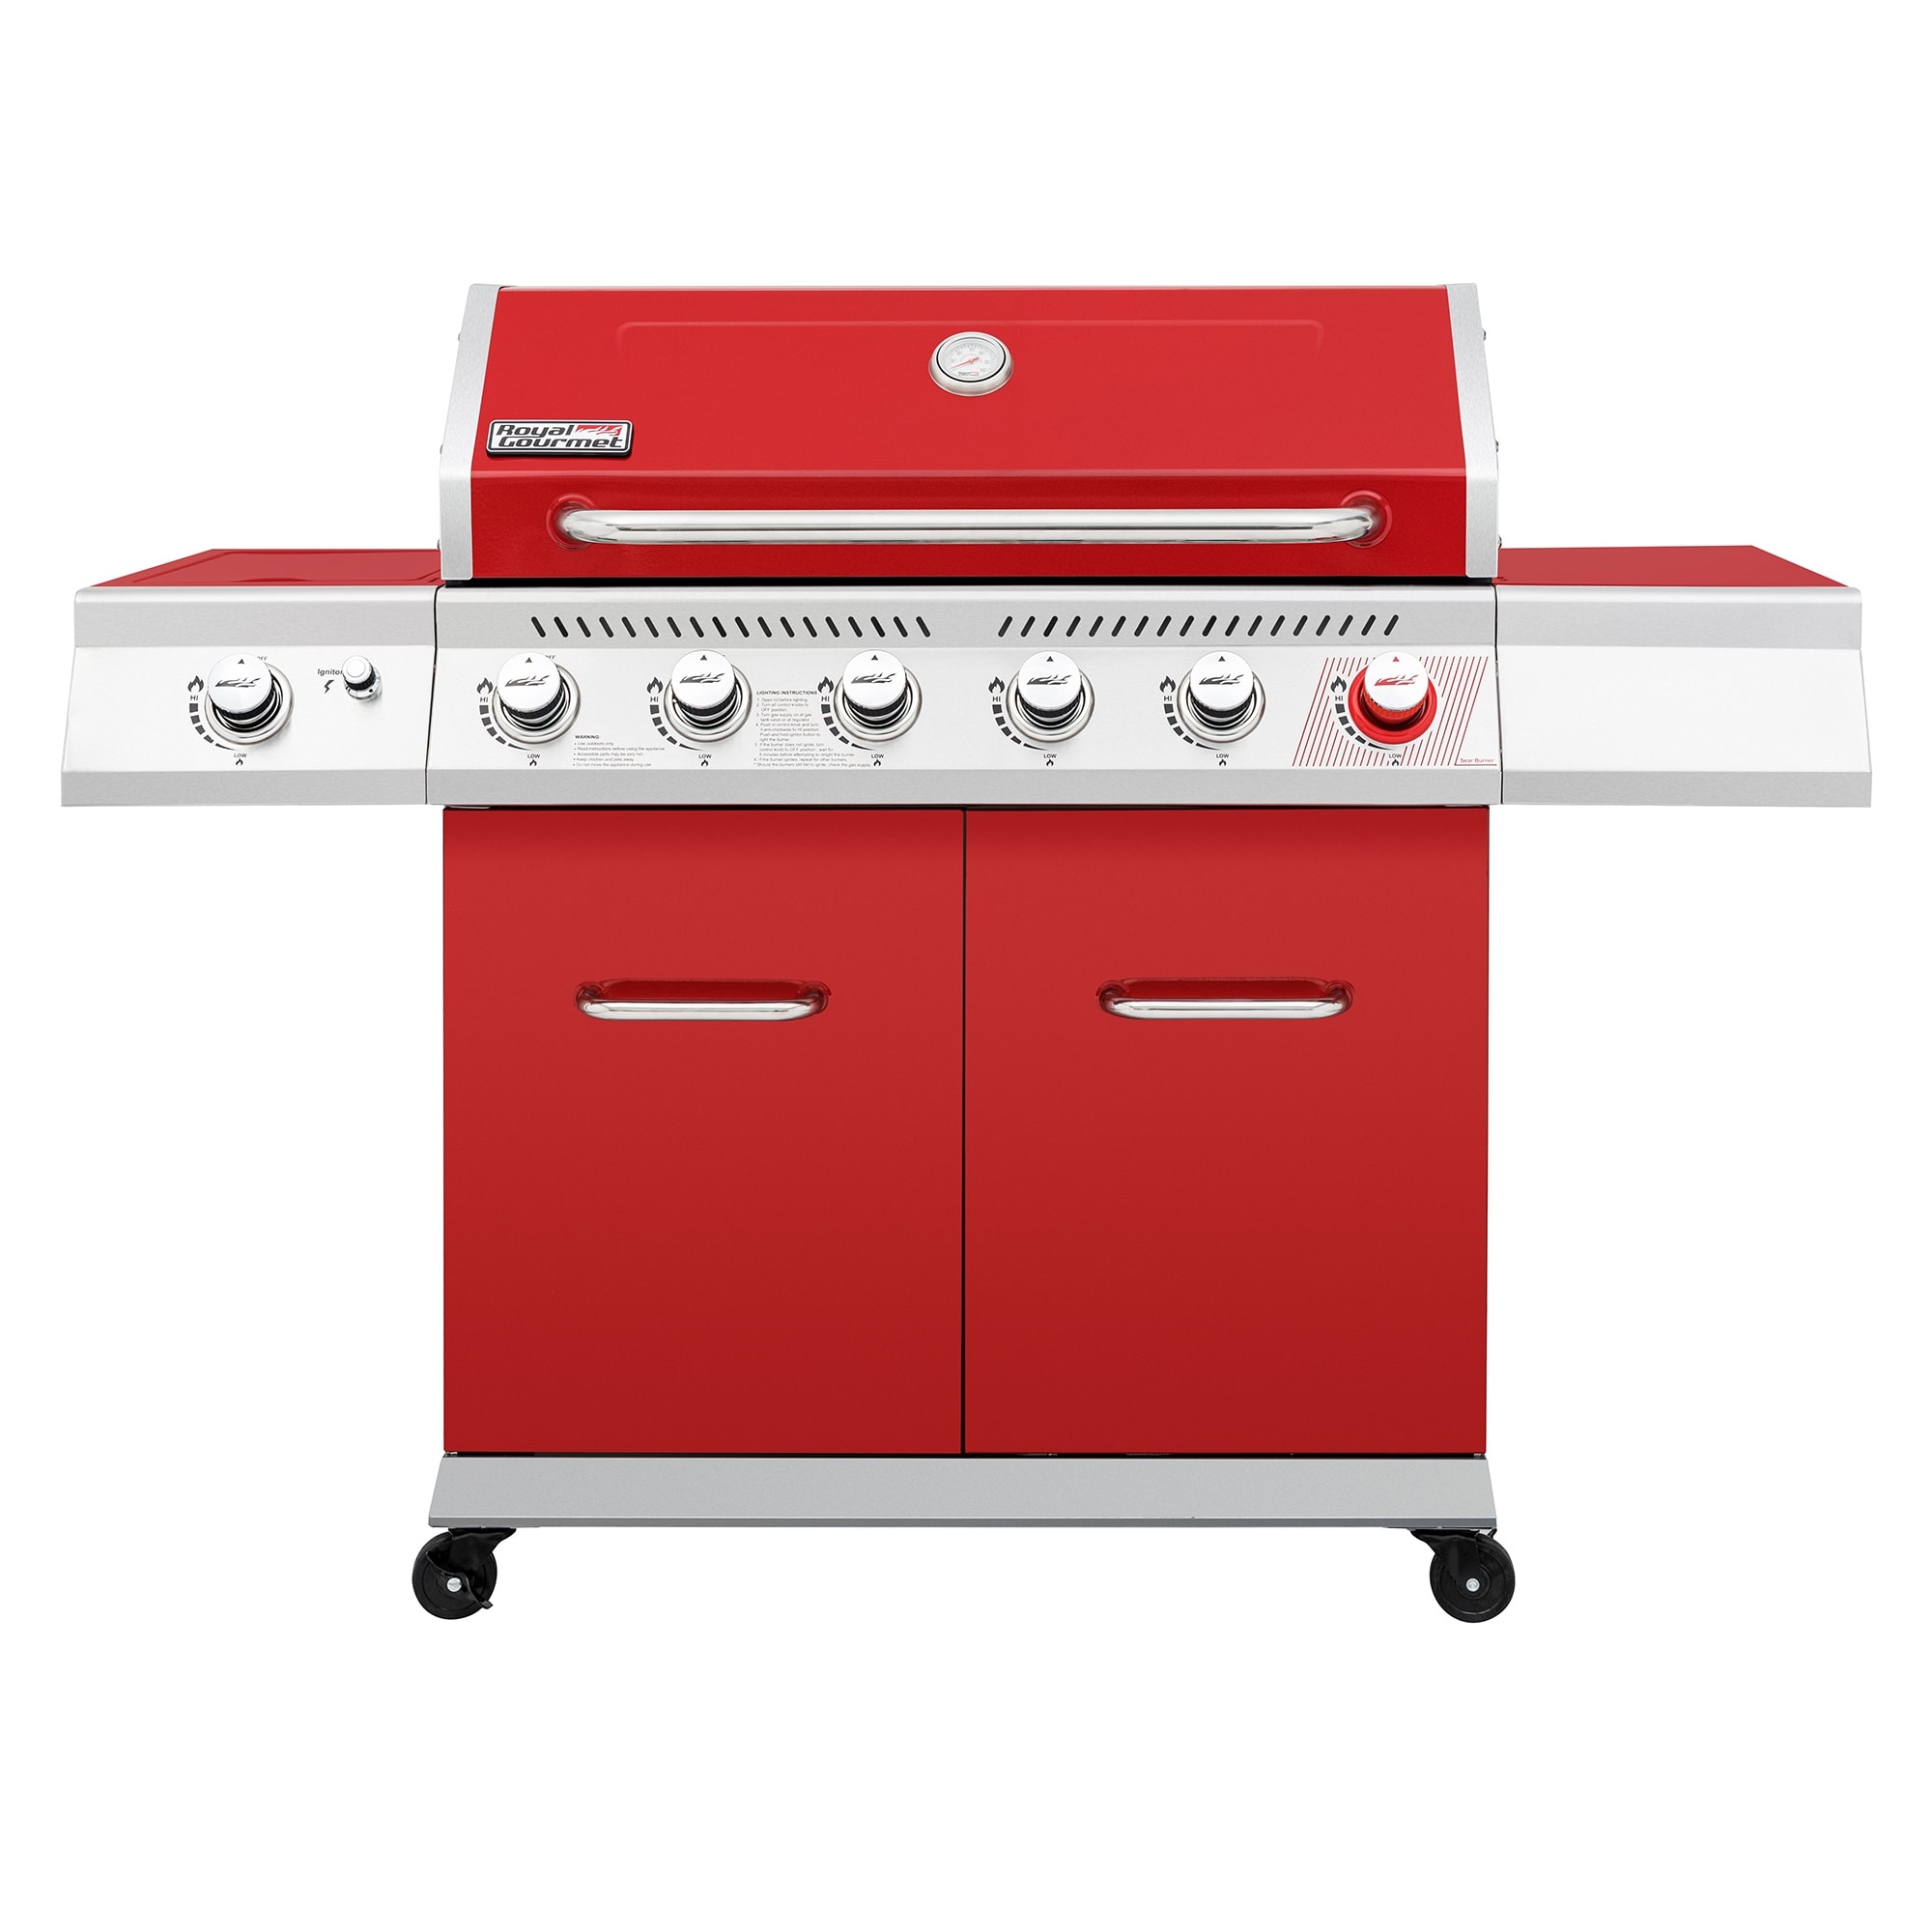 Royal Gourmet 6-burnergas Grill With Sear Burner And Side Burner  Red